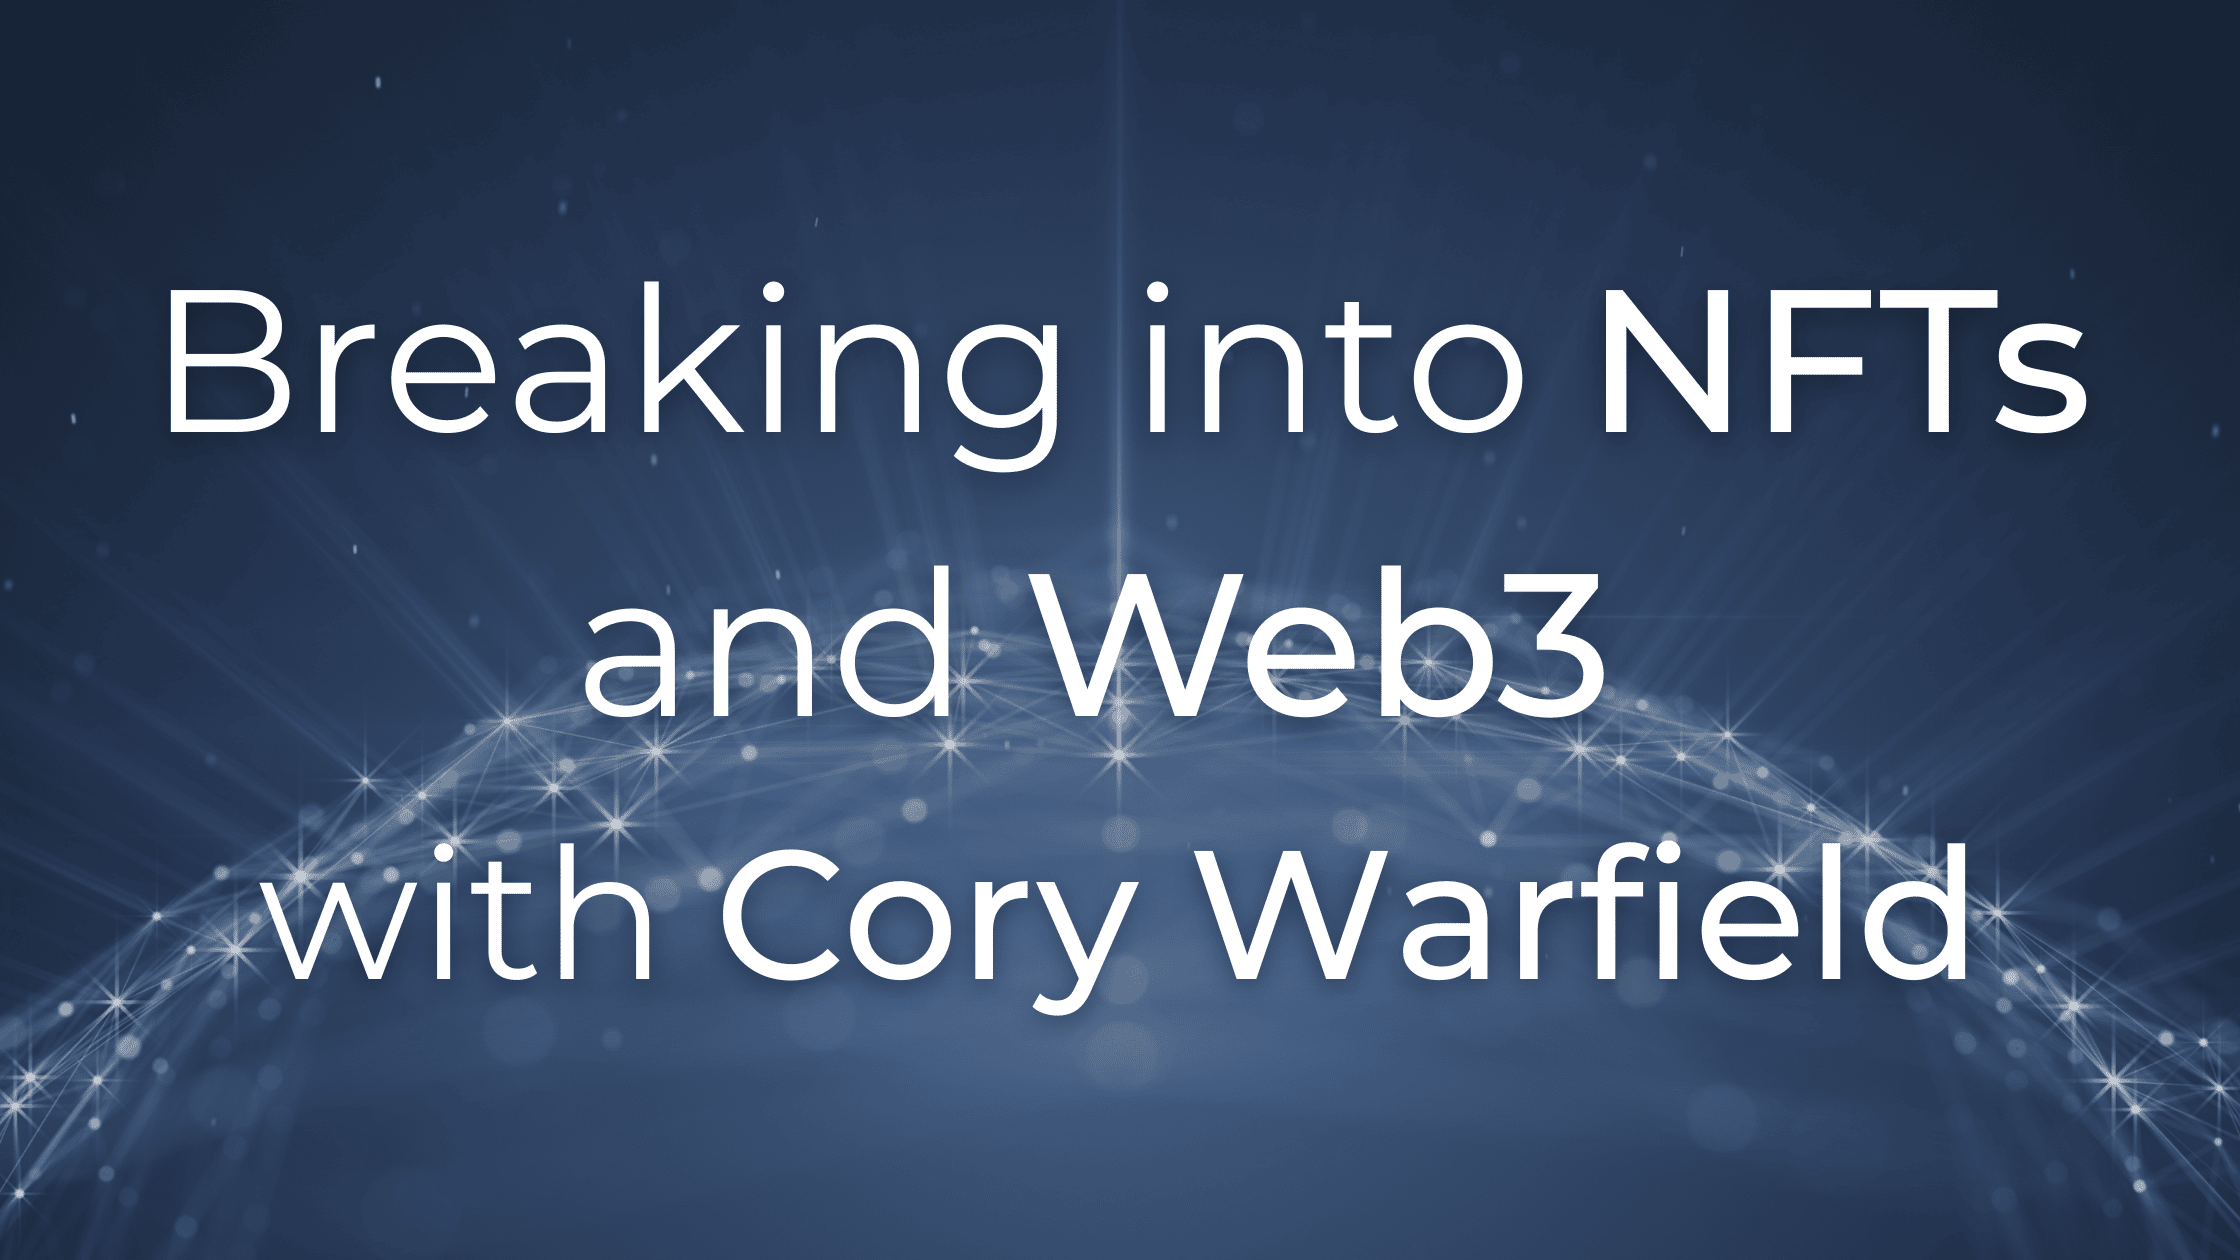 Breaking into NFTs and Web3 with Cory Warfield